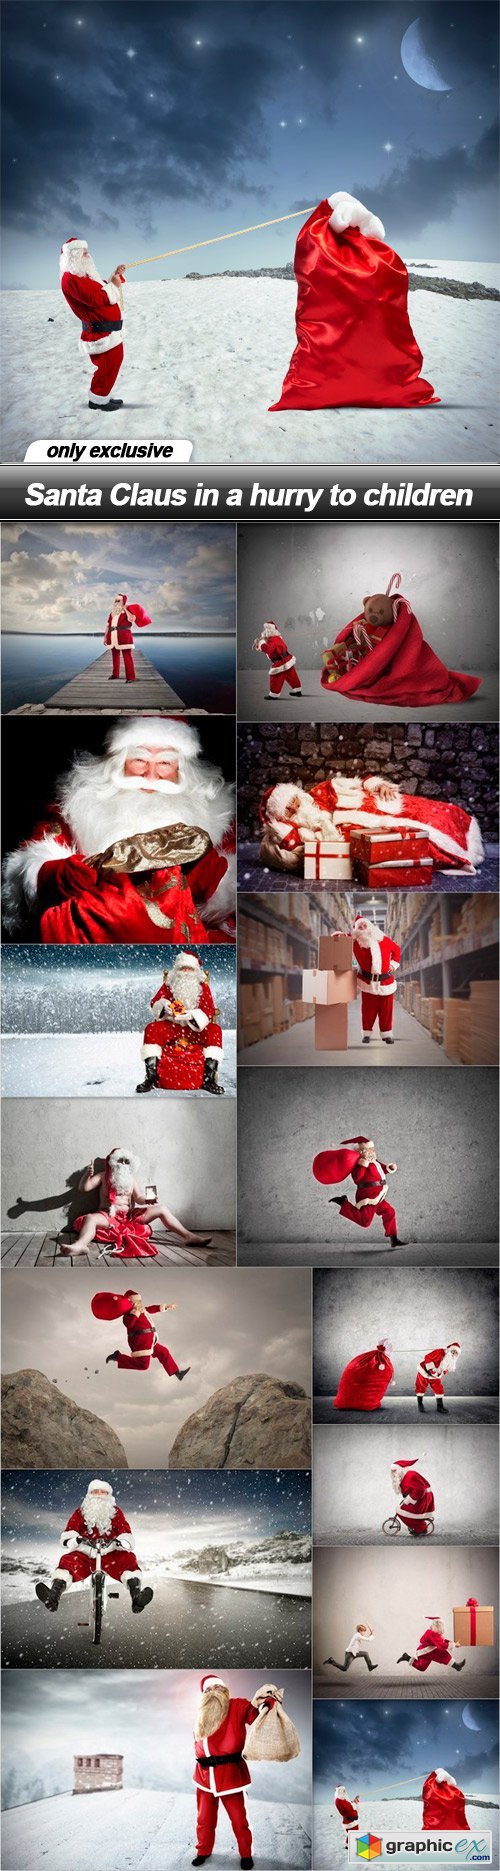 Santa Claus in a hurry to children - 15 UHQ JPEG